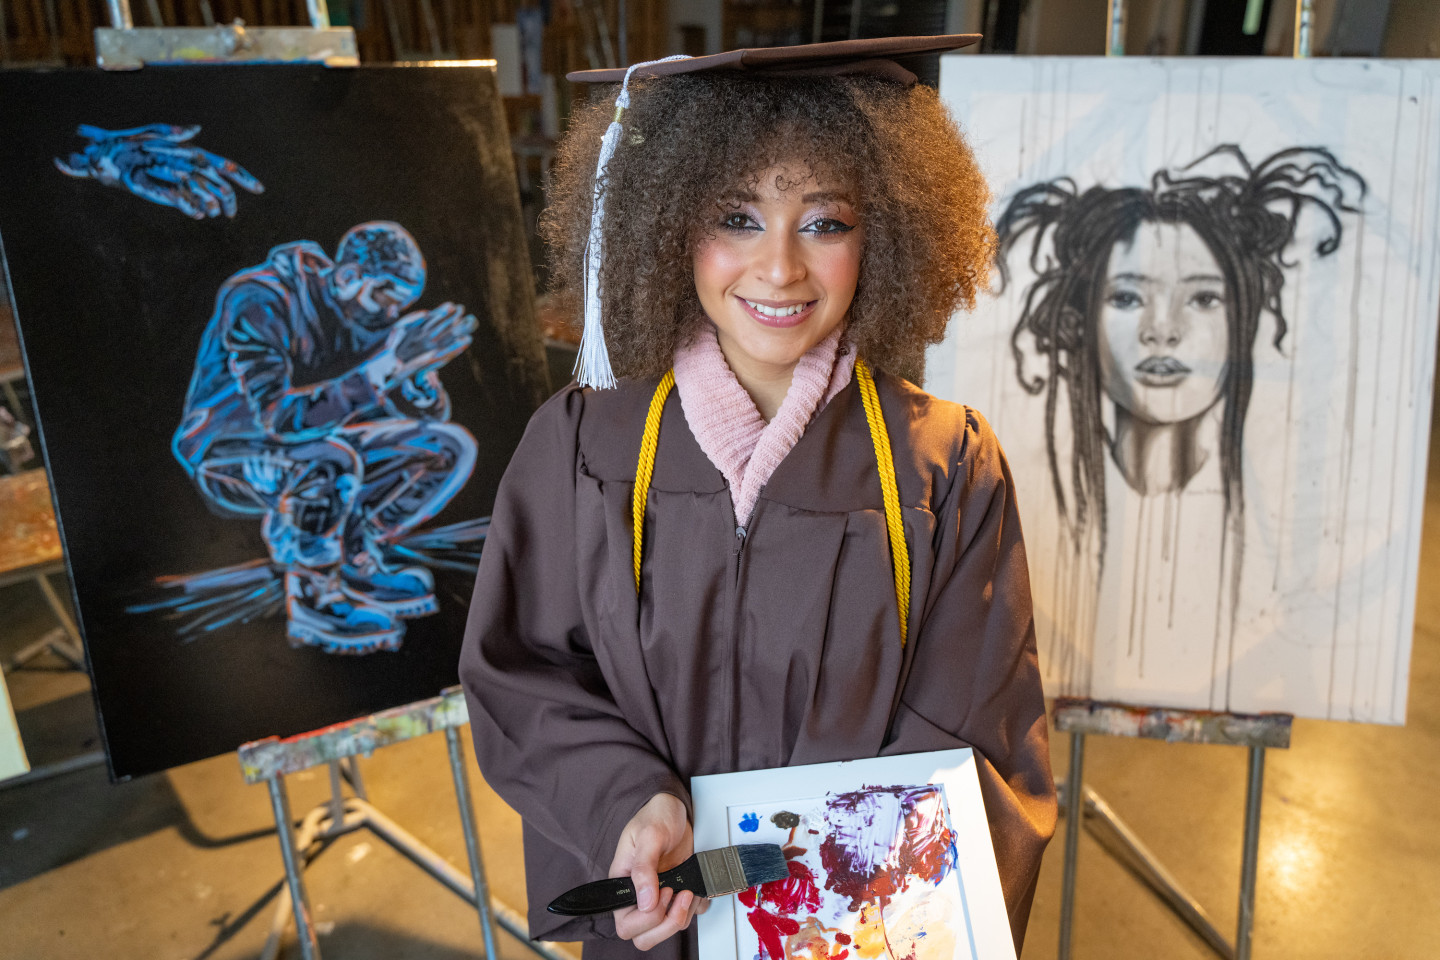 A portrait of Sharmane Flanders in her graduation regalia standing in front of two paintings and holding a colorful canvas and paint brush.